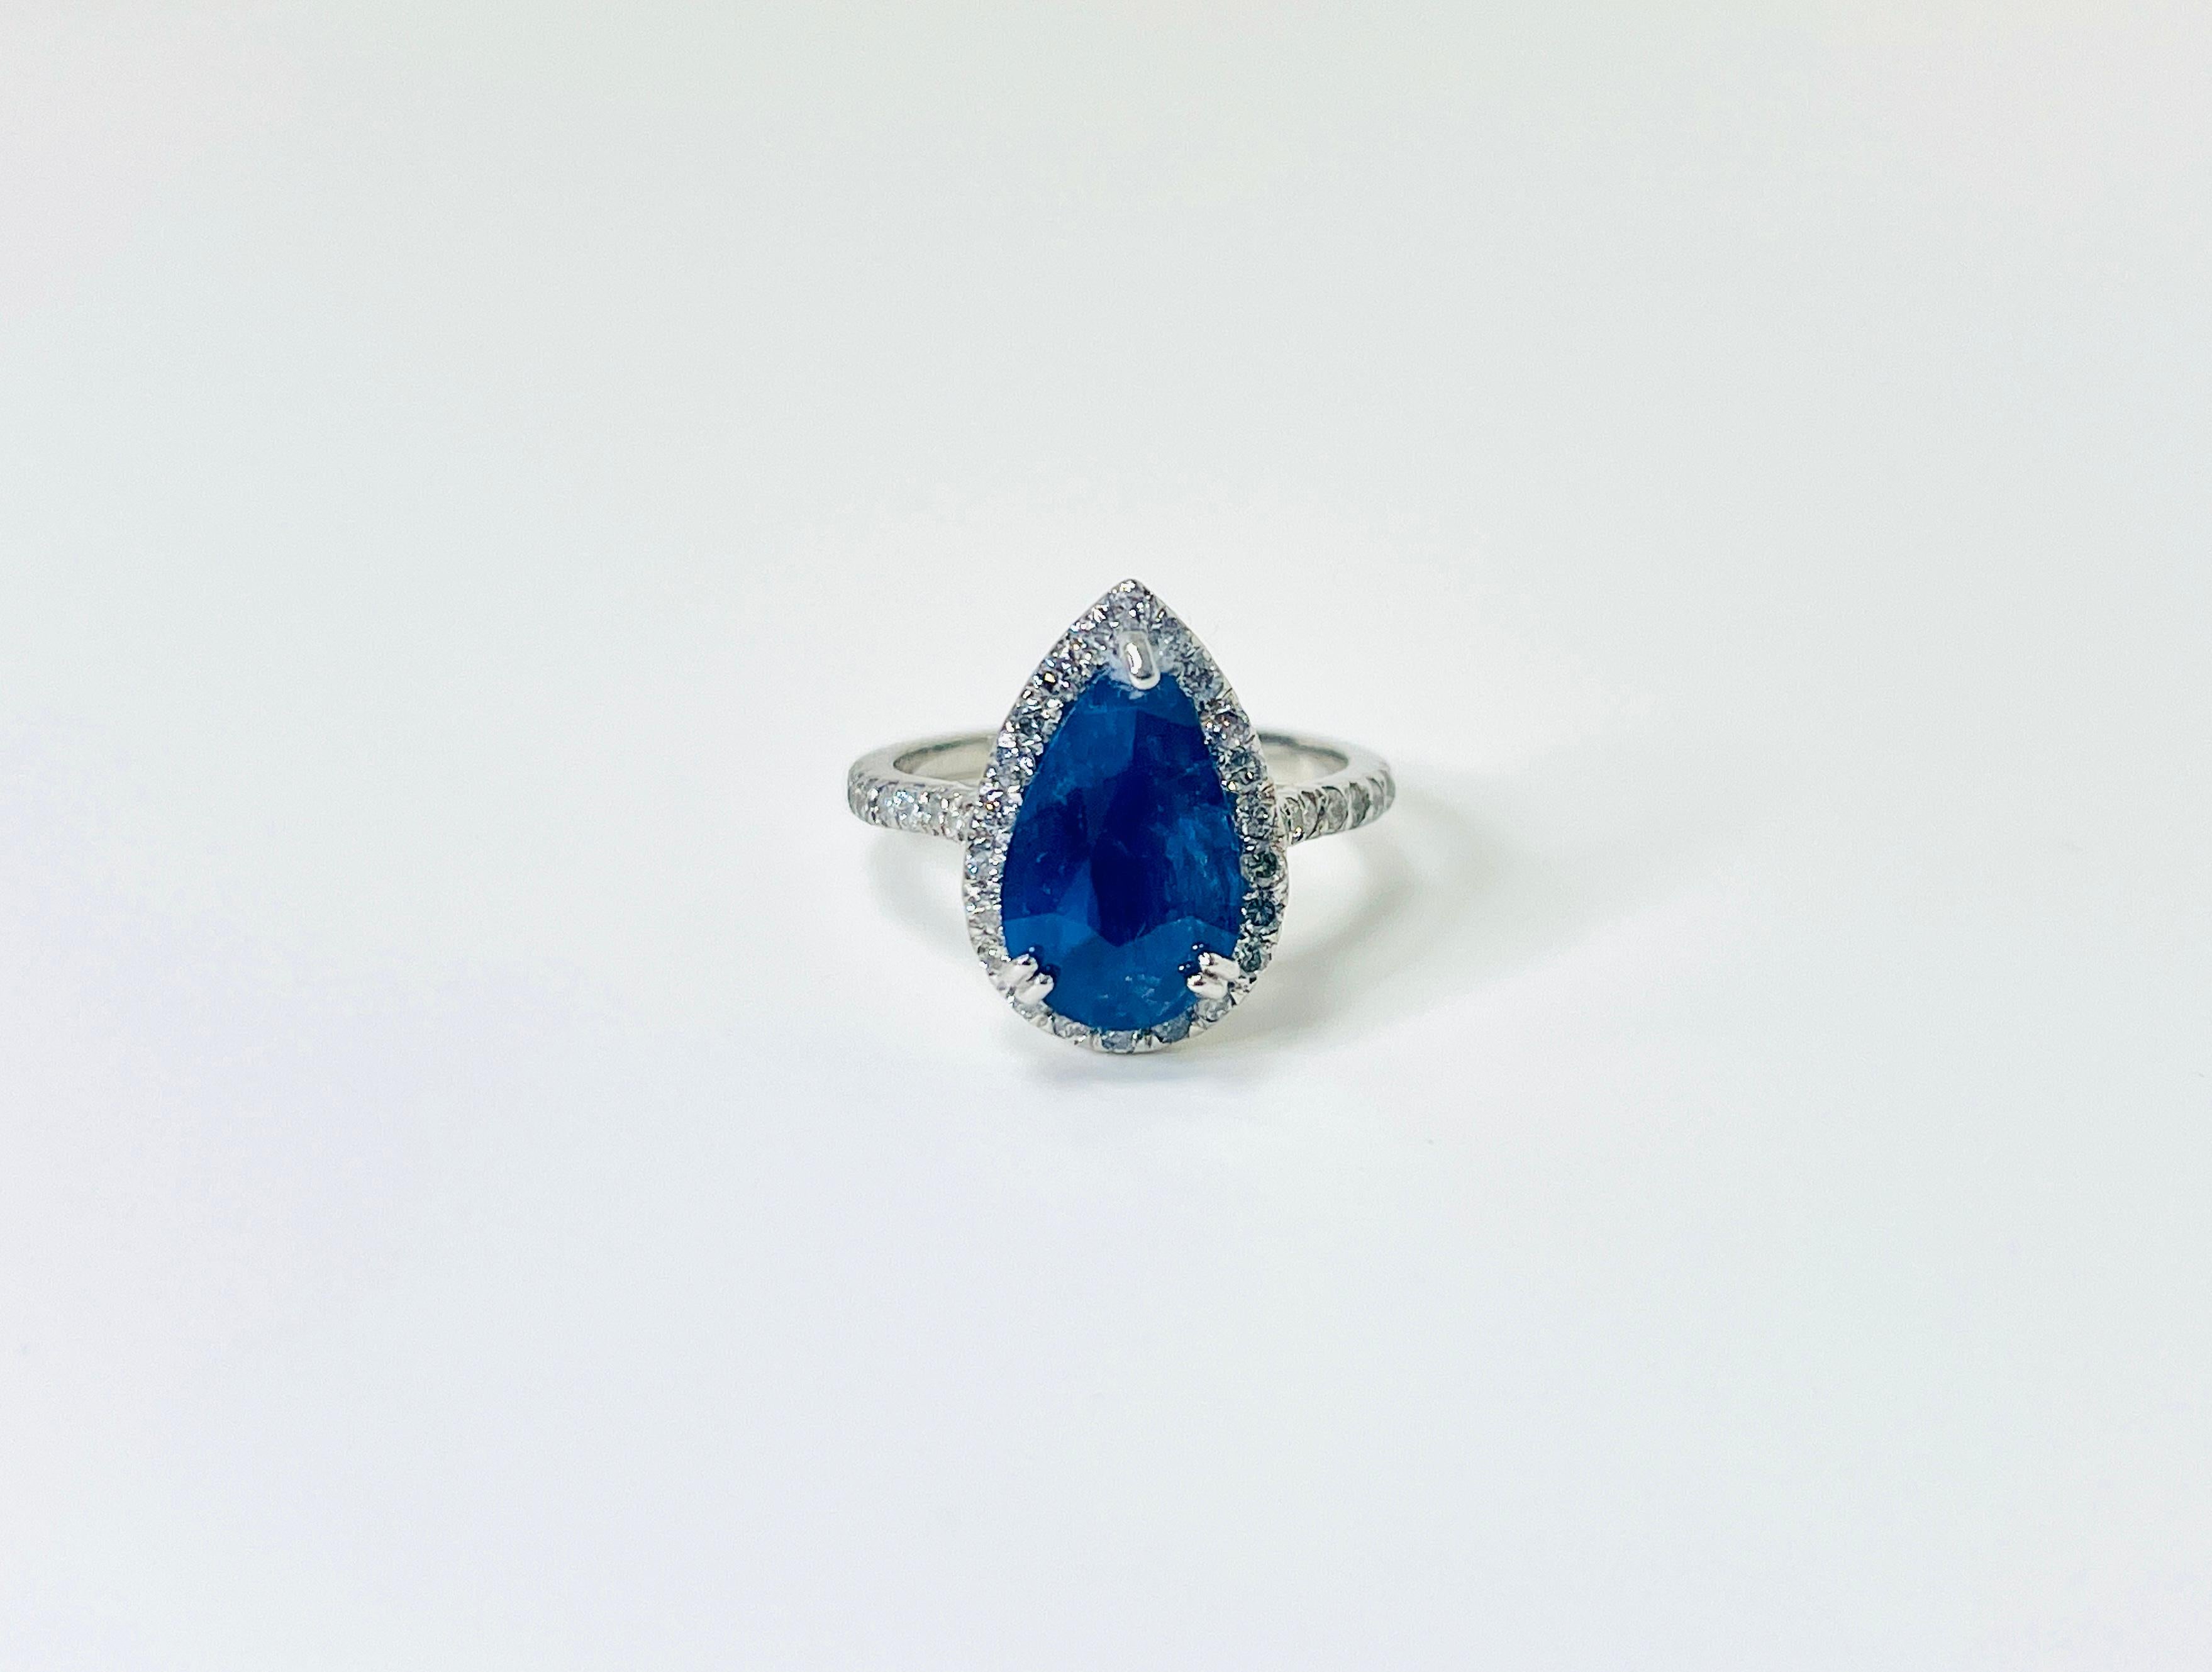 1.29 Carat Intense Blue Pear Shape Cut Natural Sapphire Diamond 14K White Gold Ring

1.29 Carats Natural Sapphire Center Stone
0.70 Carats 29 Pieces Diamonds
Average G-I, 3.57 grams, size 6

*Free shipping within the U.S.*


